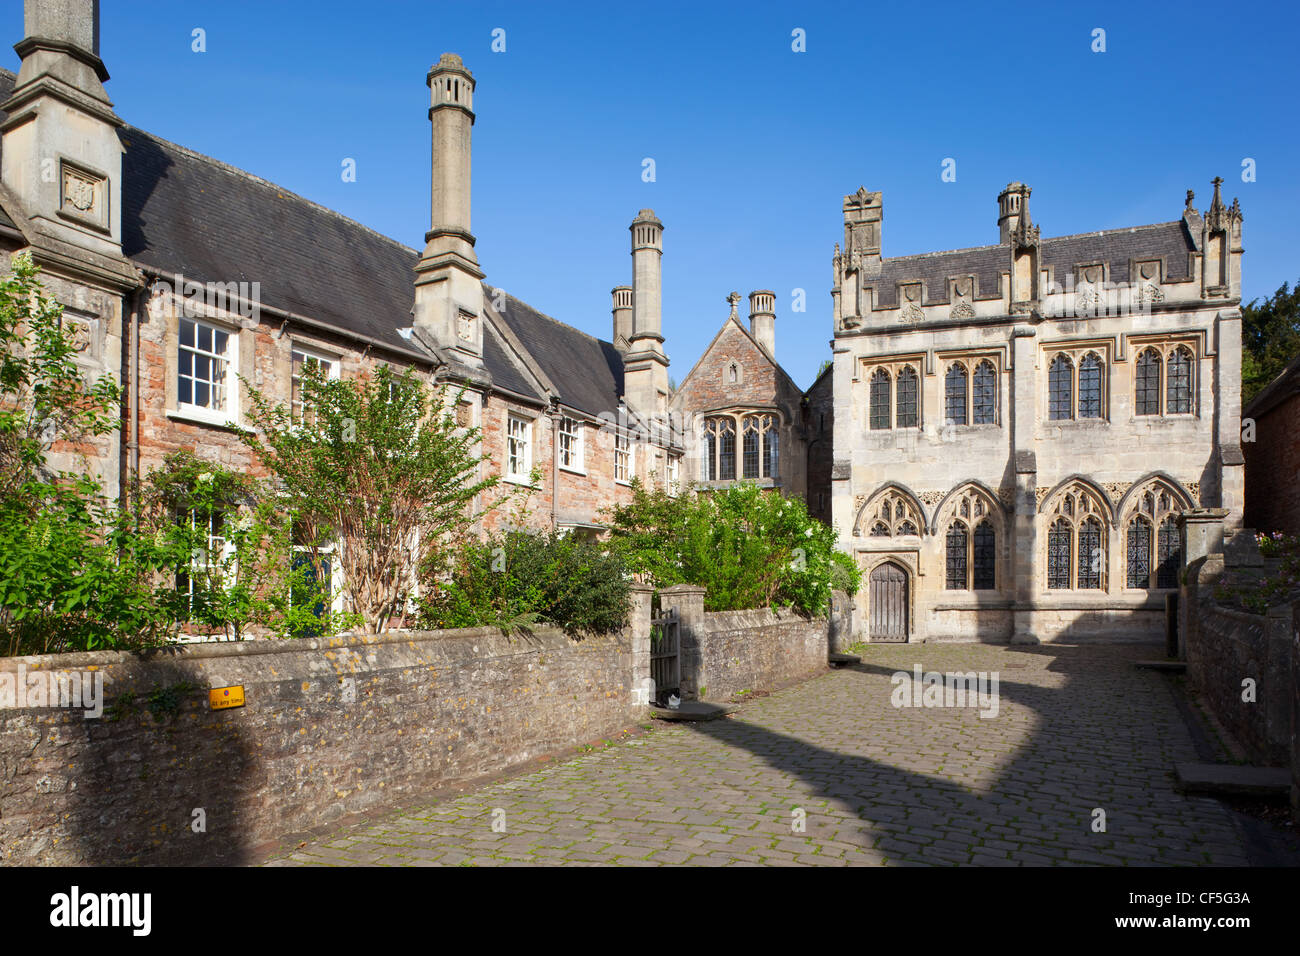 Vicars' Close in Wells, claimed to be the oldest residential street in Europe. The street dates from the mid 14th century. Stock Photo